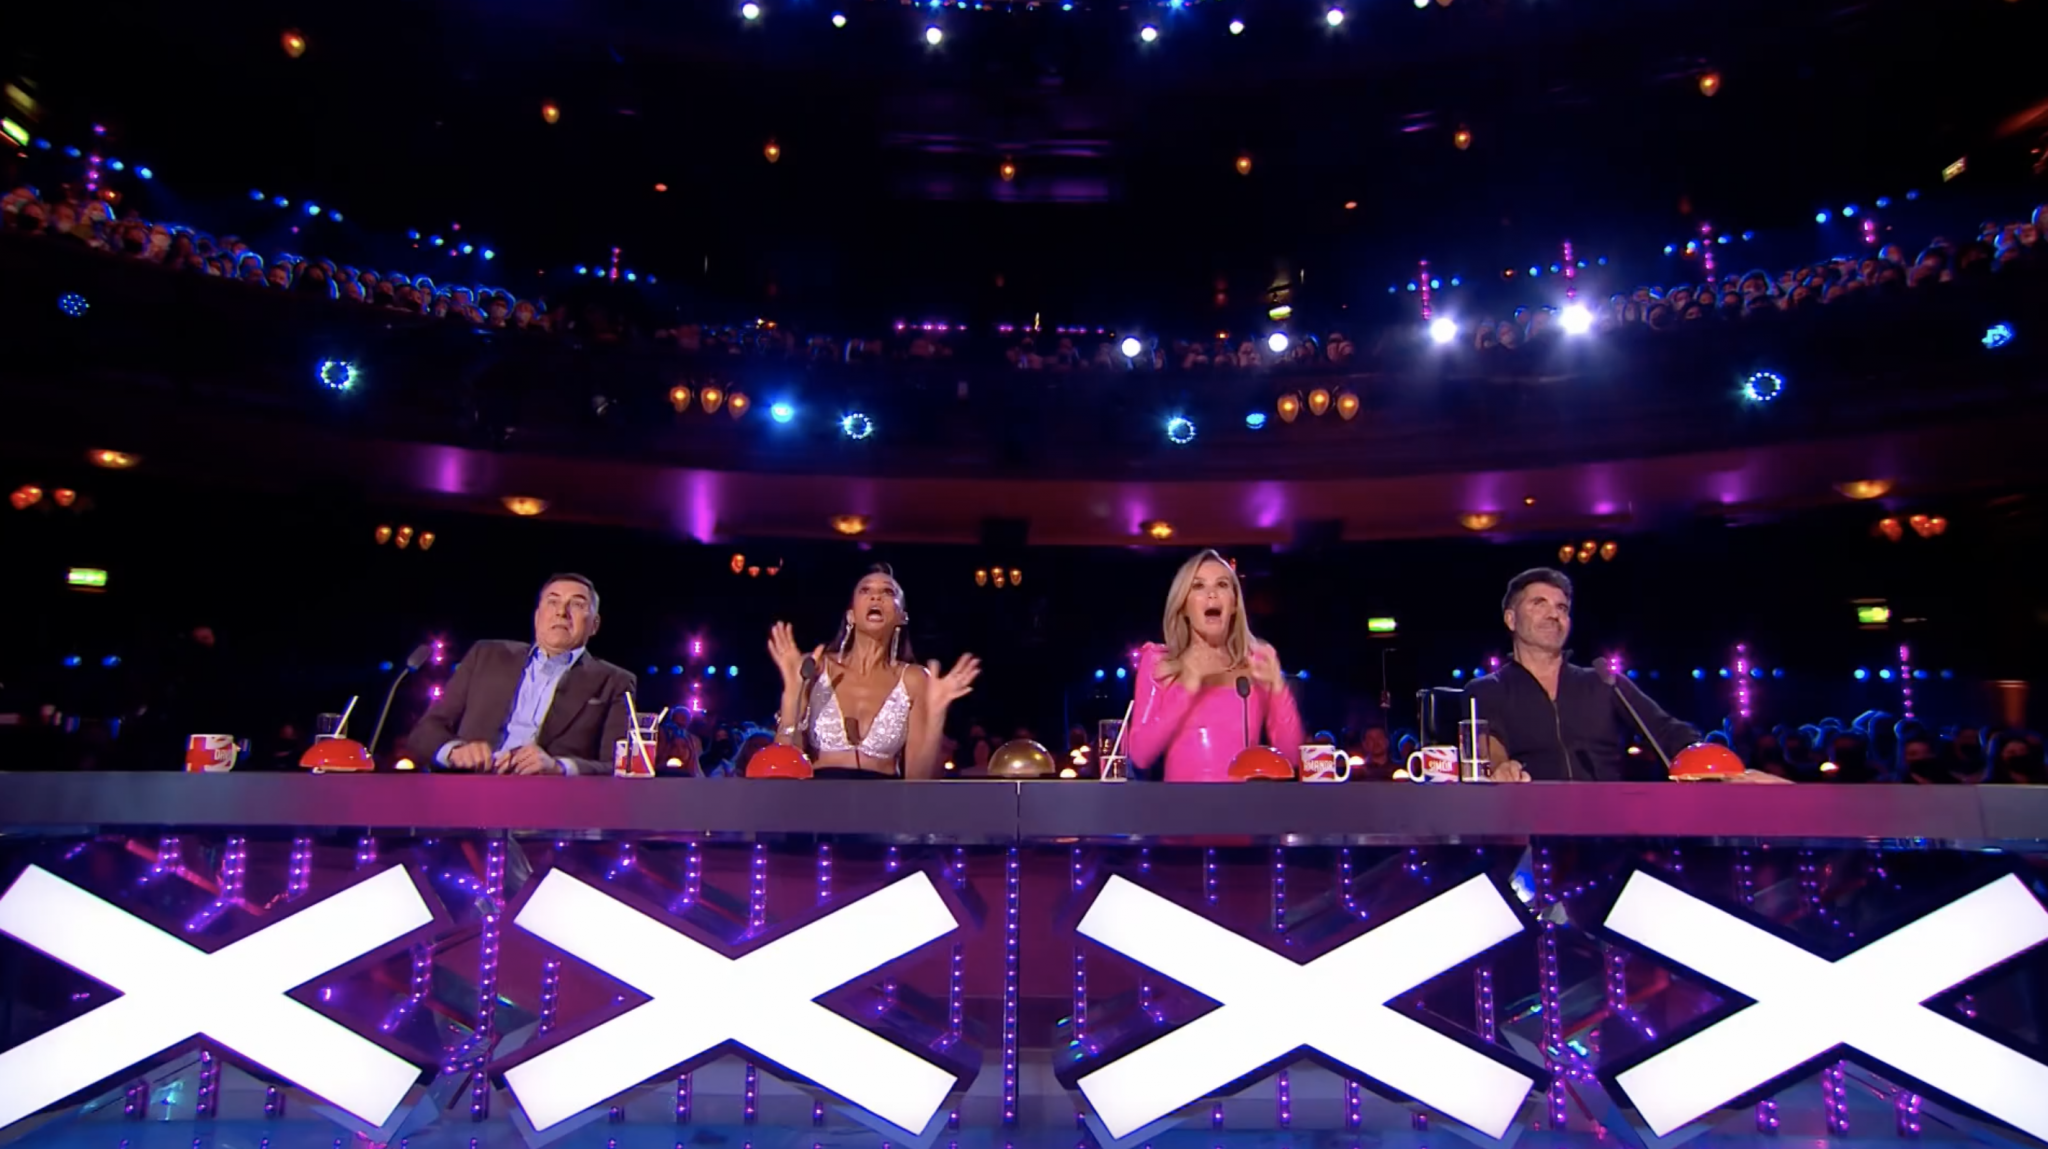 Judges are shocked by Titan the Robot's performance on Britain's Got Talent at the London Palladium. #BGT